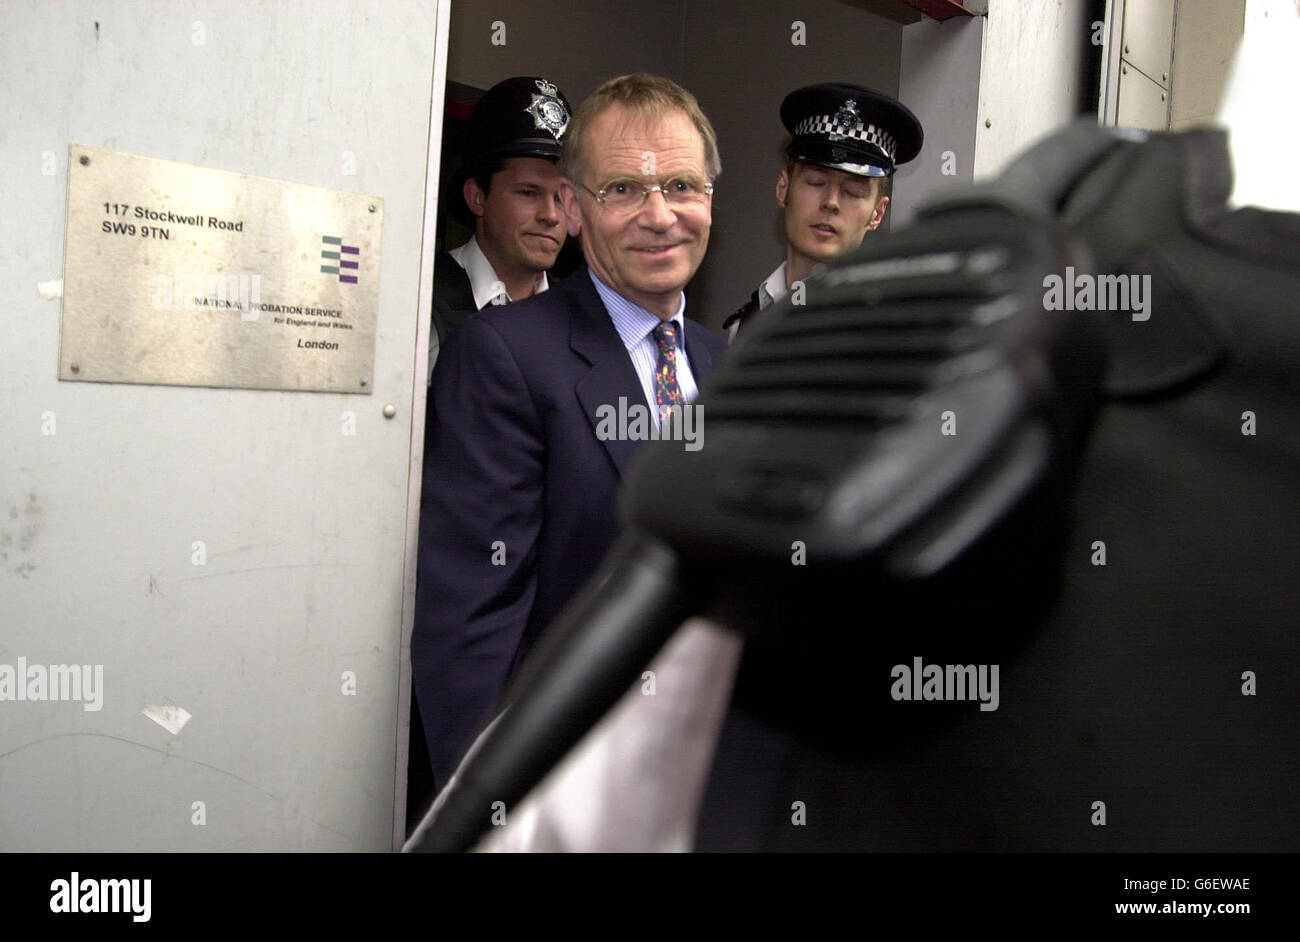 Lord Archer during his visit to his probation officer at 117 Stockwell Road, London. Archer met his probation officer for the first time since being released from jail. Entering the grey graffiti-daubed building in south London, he remained tight-lipped despite his new-found freedom. He was forced to make his way slowly through the pack of photographers to reach the entrance. Stock Photo